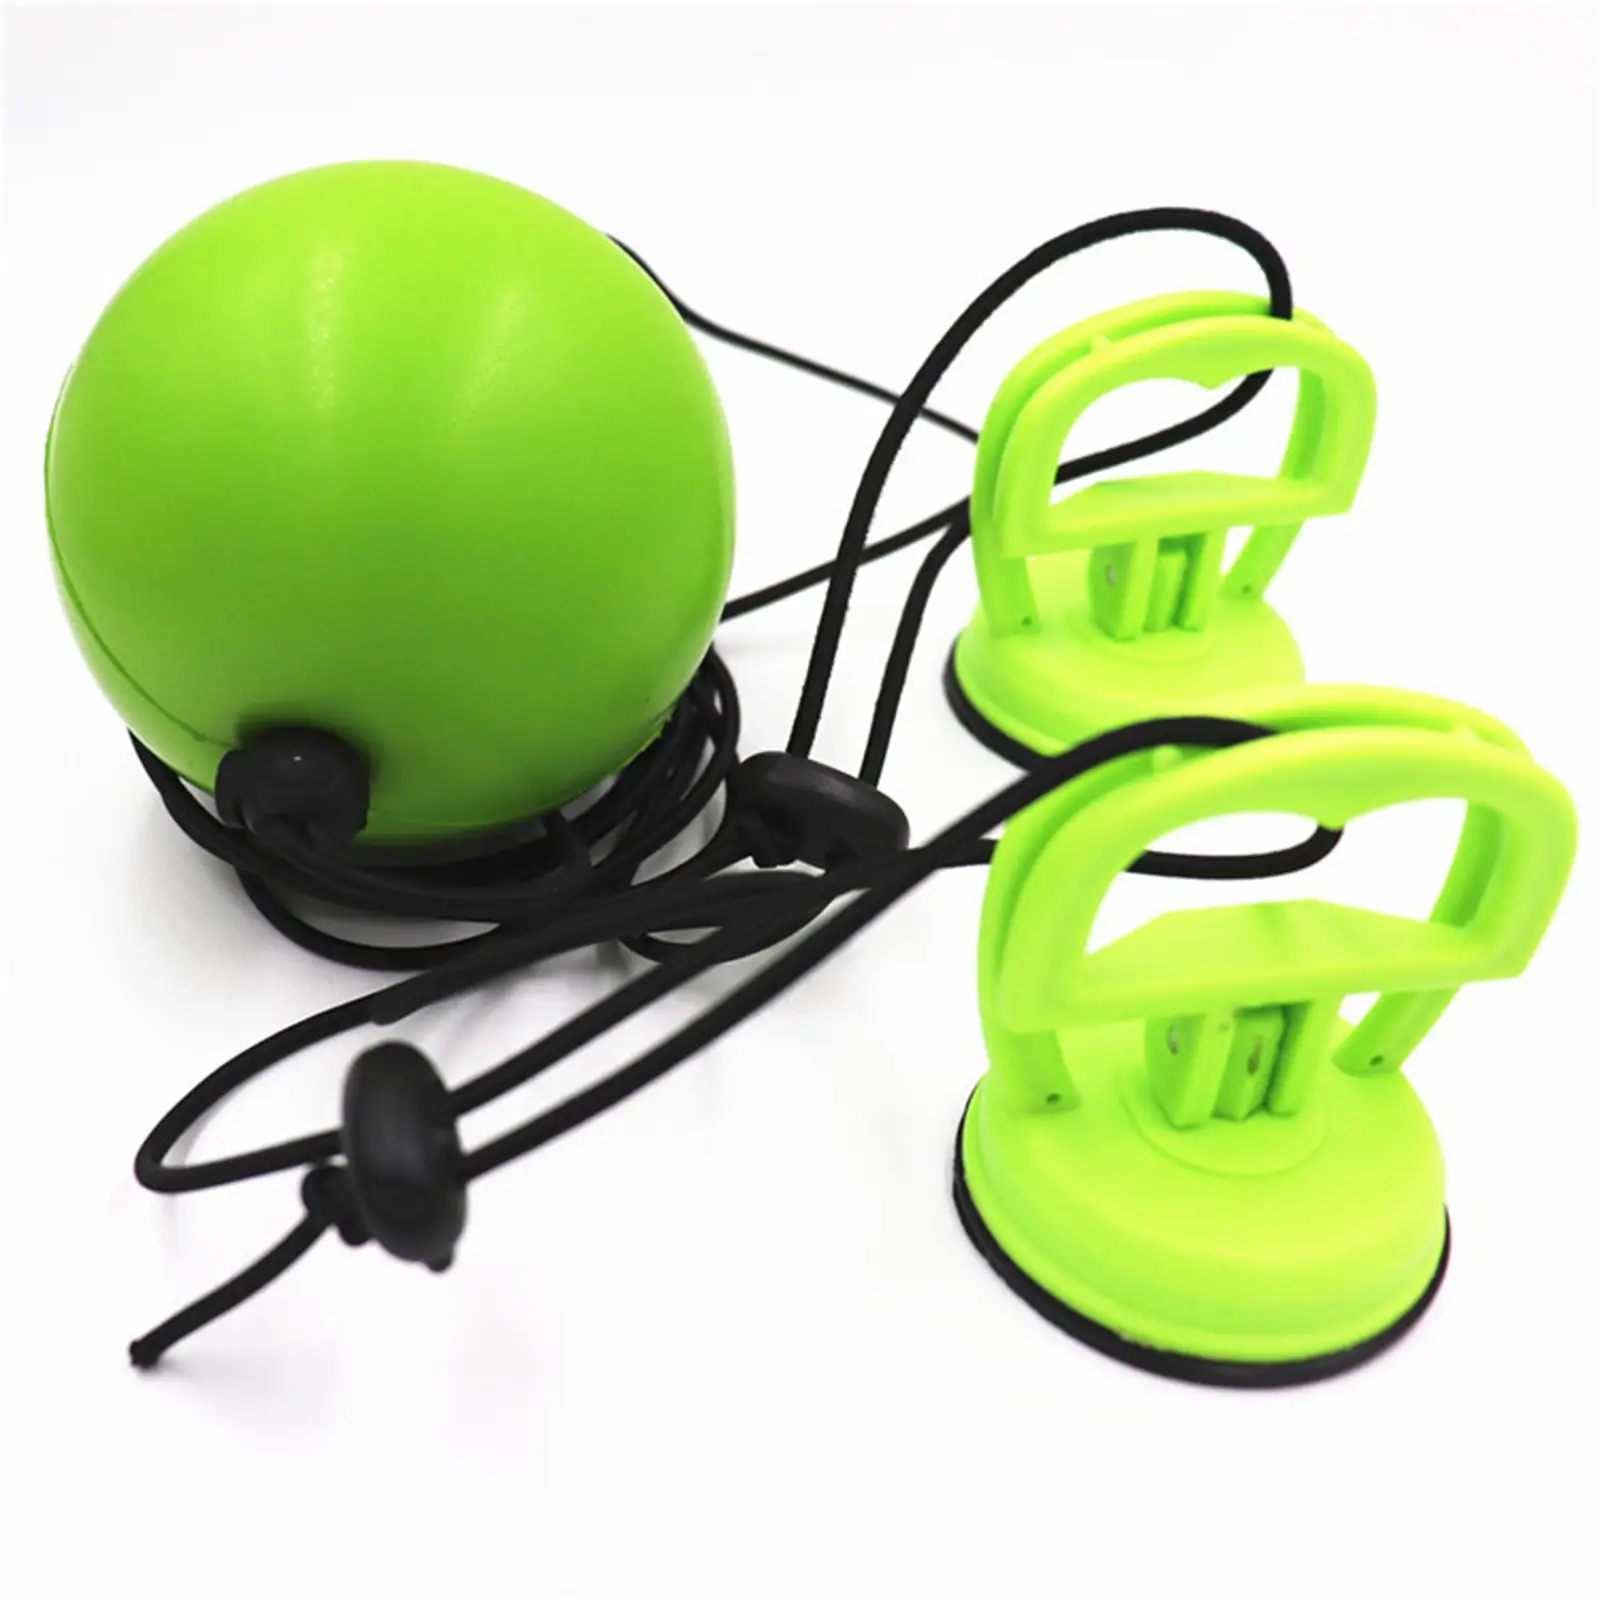 Premium Boxing  Ball Training Punching Ball Workout  Suction Cup for  Coordination Agility